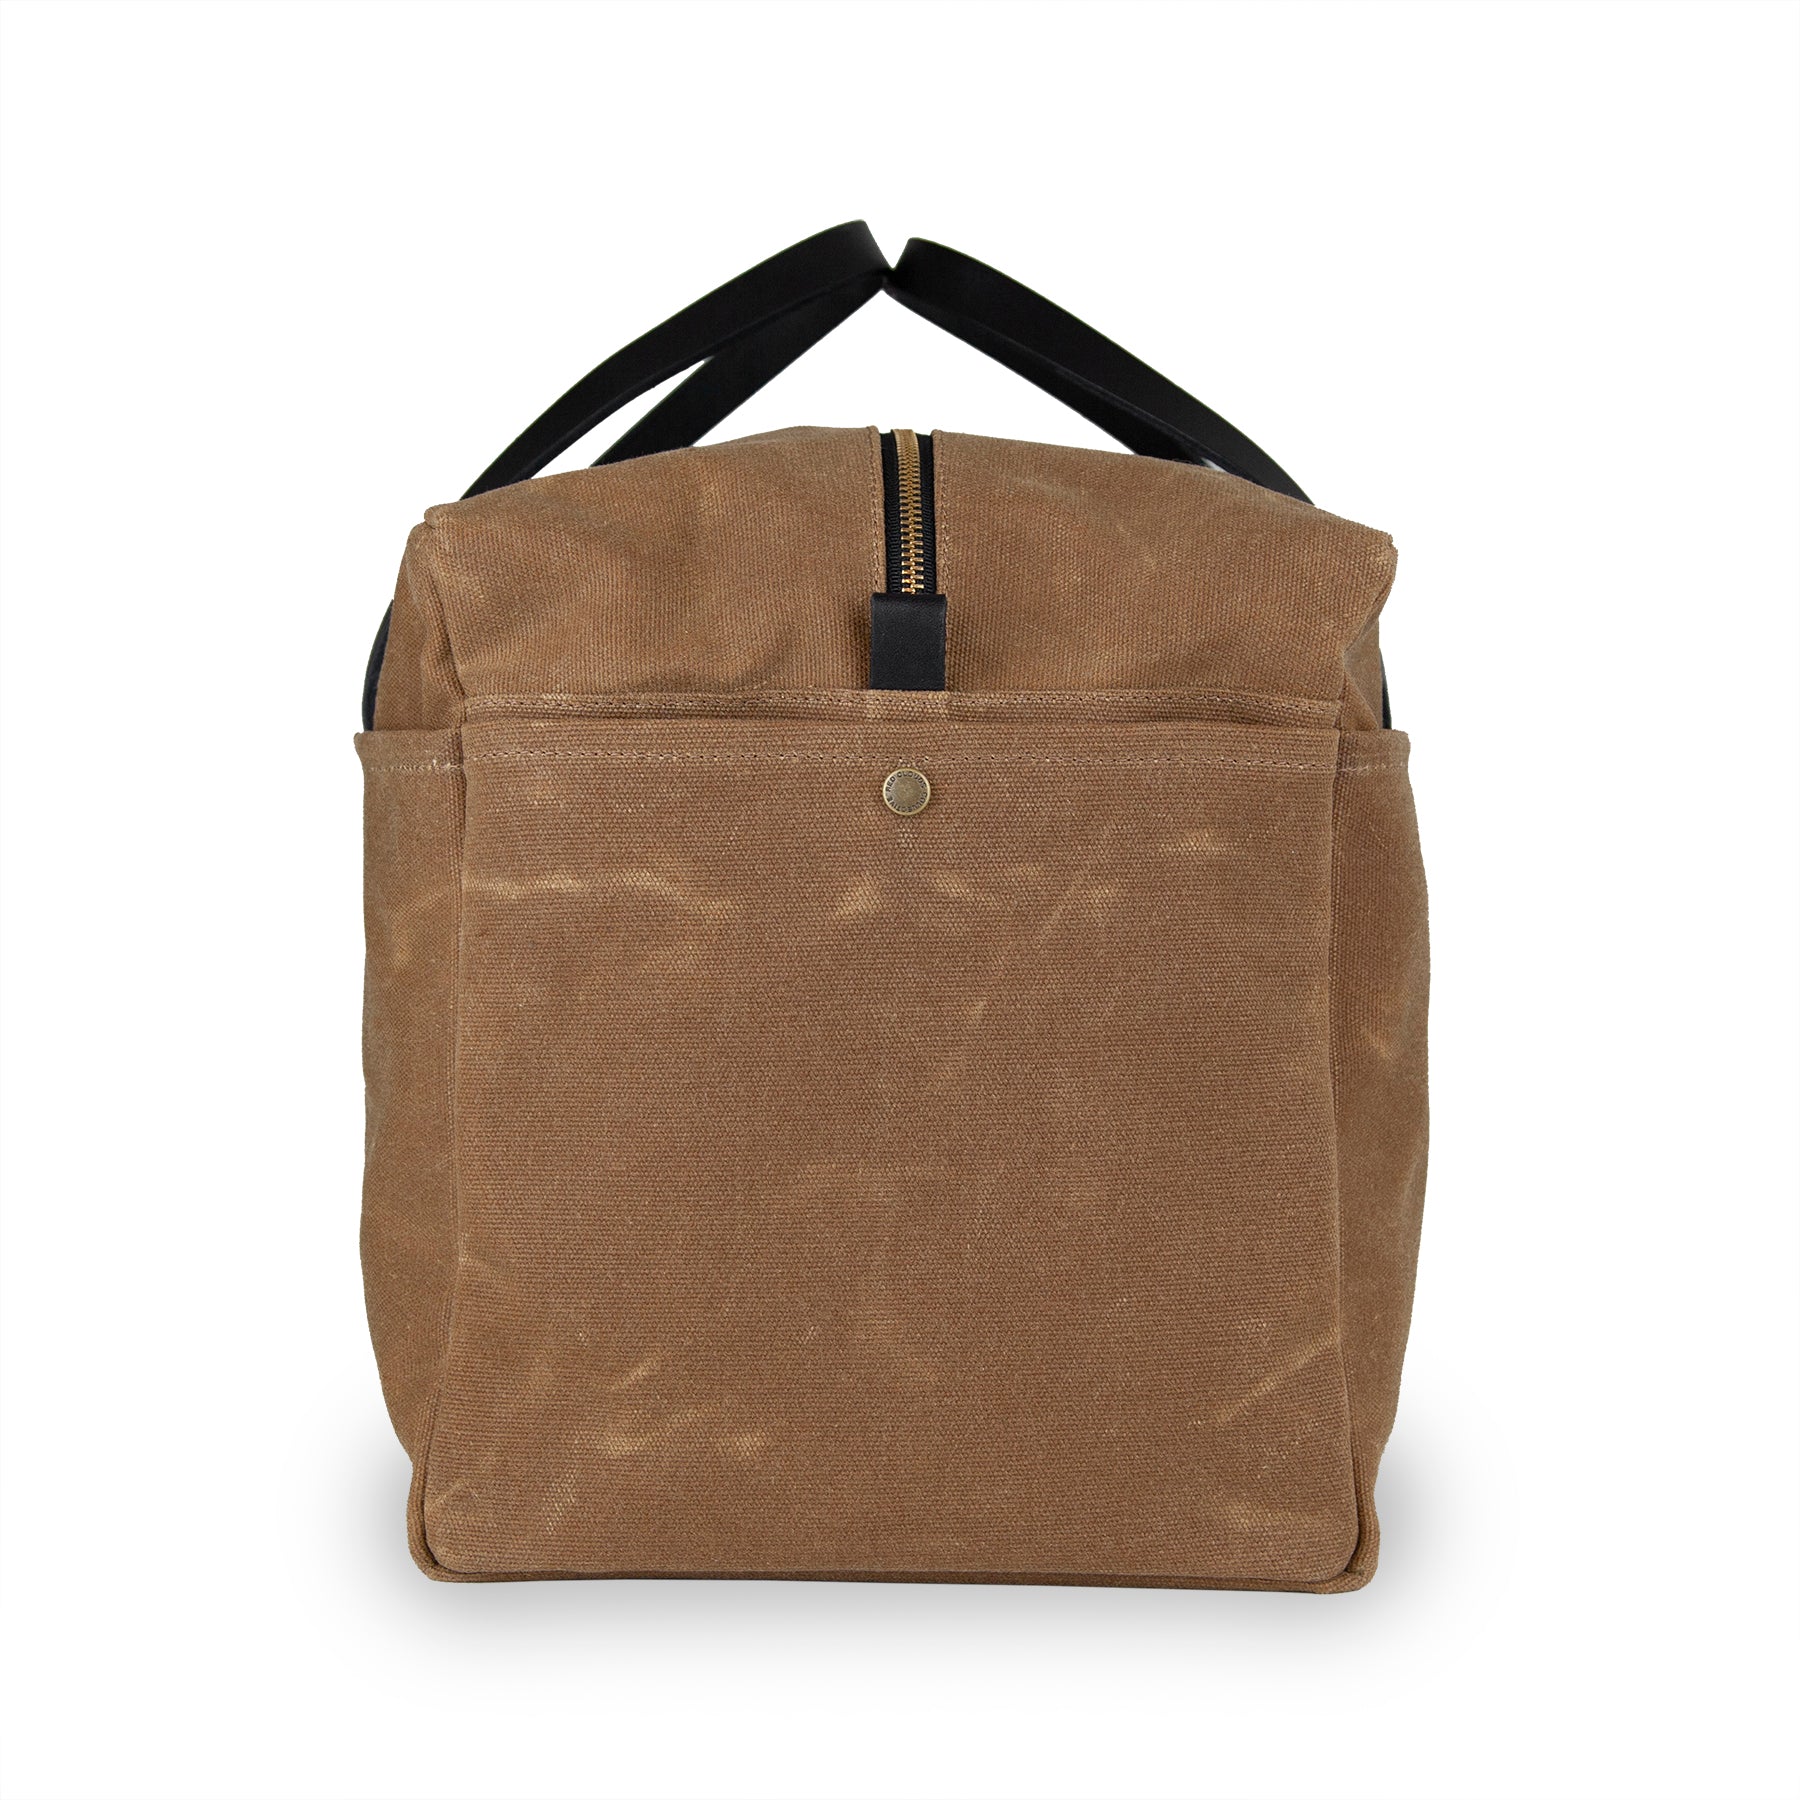 Waxed Canvas Duffle Bag - Brush Brown With Black Leather